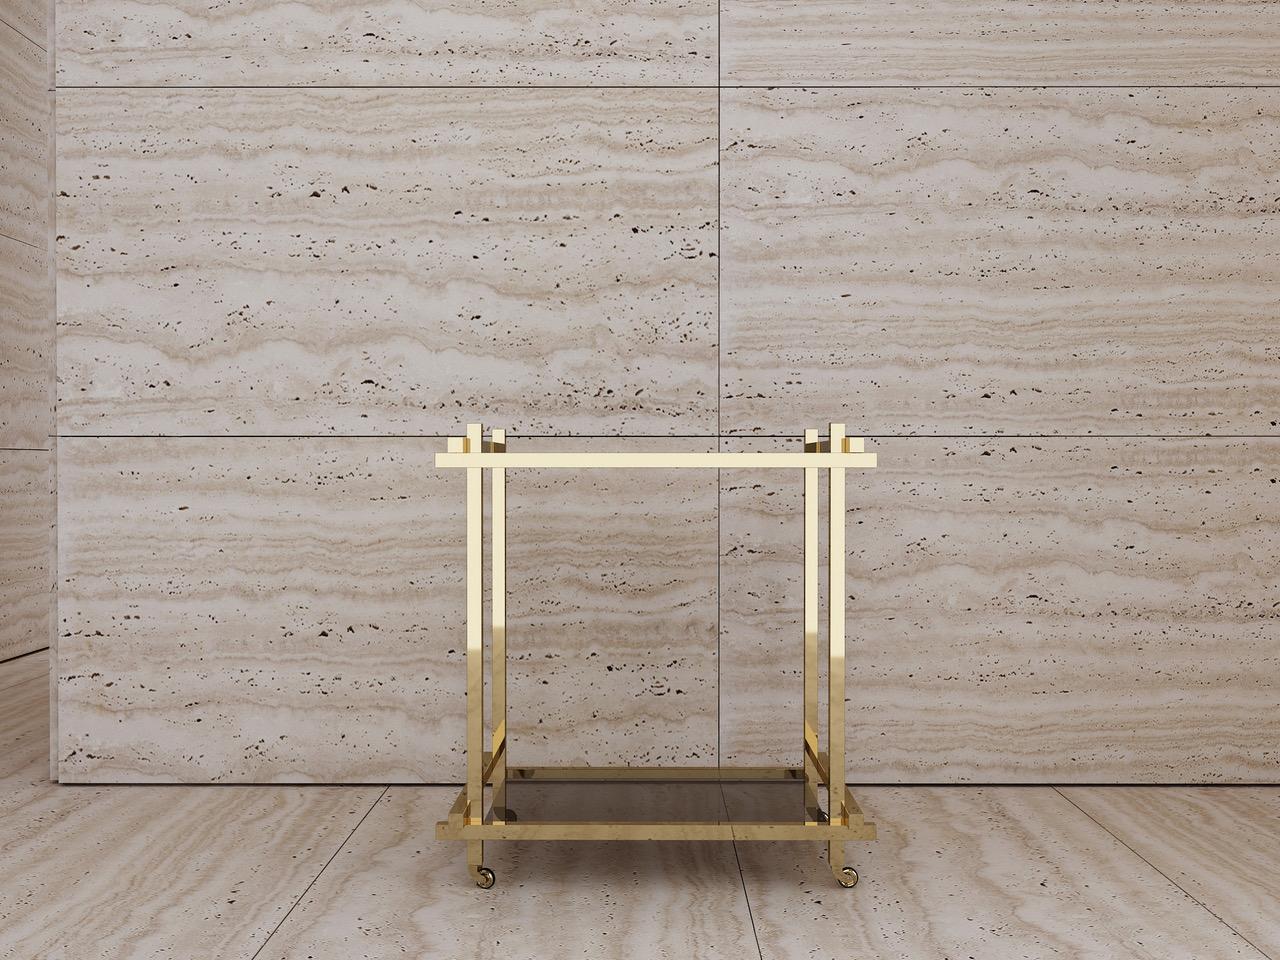 Bar cart in hand polished solid brass, handcut and wrapped nubuck leather handles and rubber banded solid brass casters.

Approximate dimensions:
W 74 x D 52 x H 82 cm

All pieces are stamped and dated according to year of production. 

Bar cart is